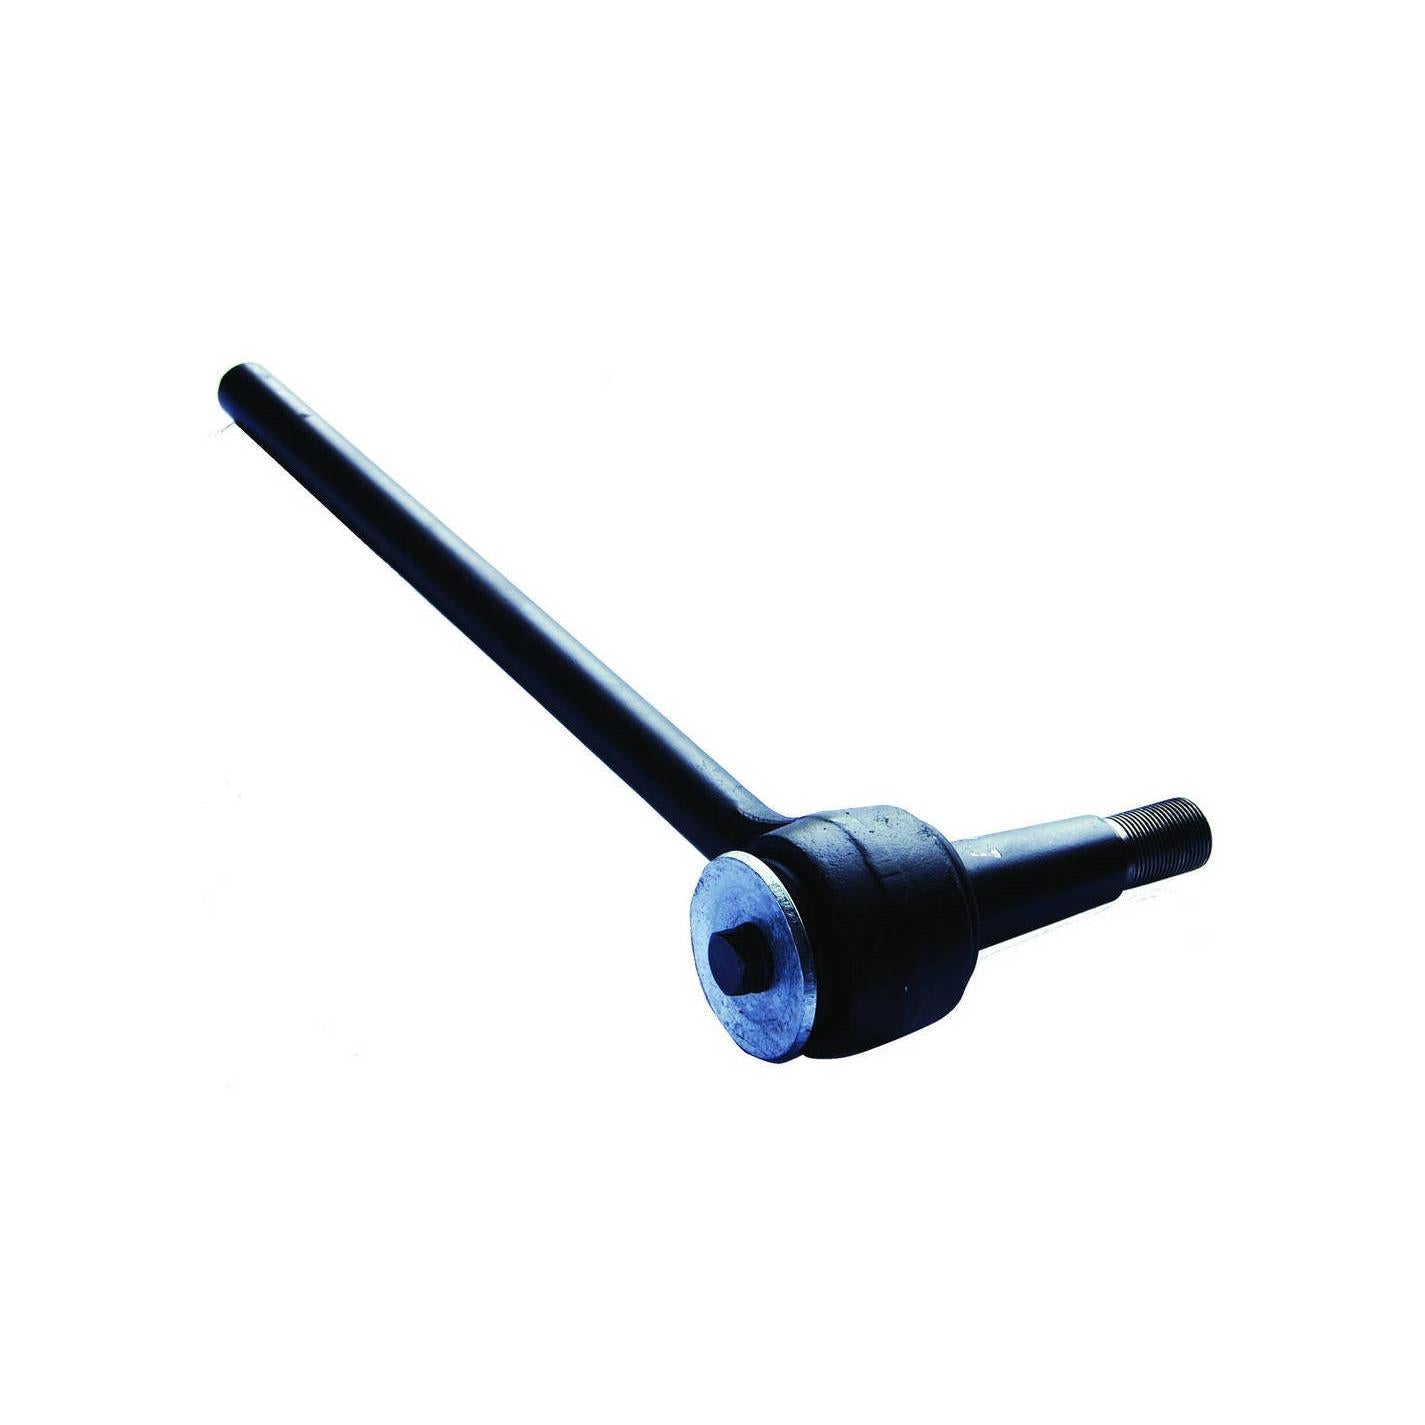 Torque Rod with Bush Replaces 66681-000, 44697-000